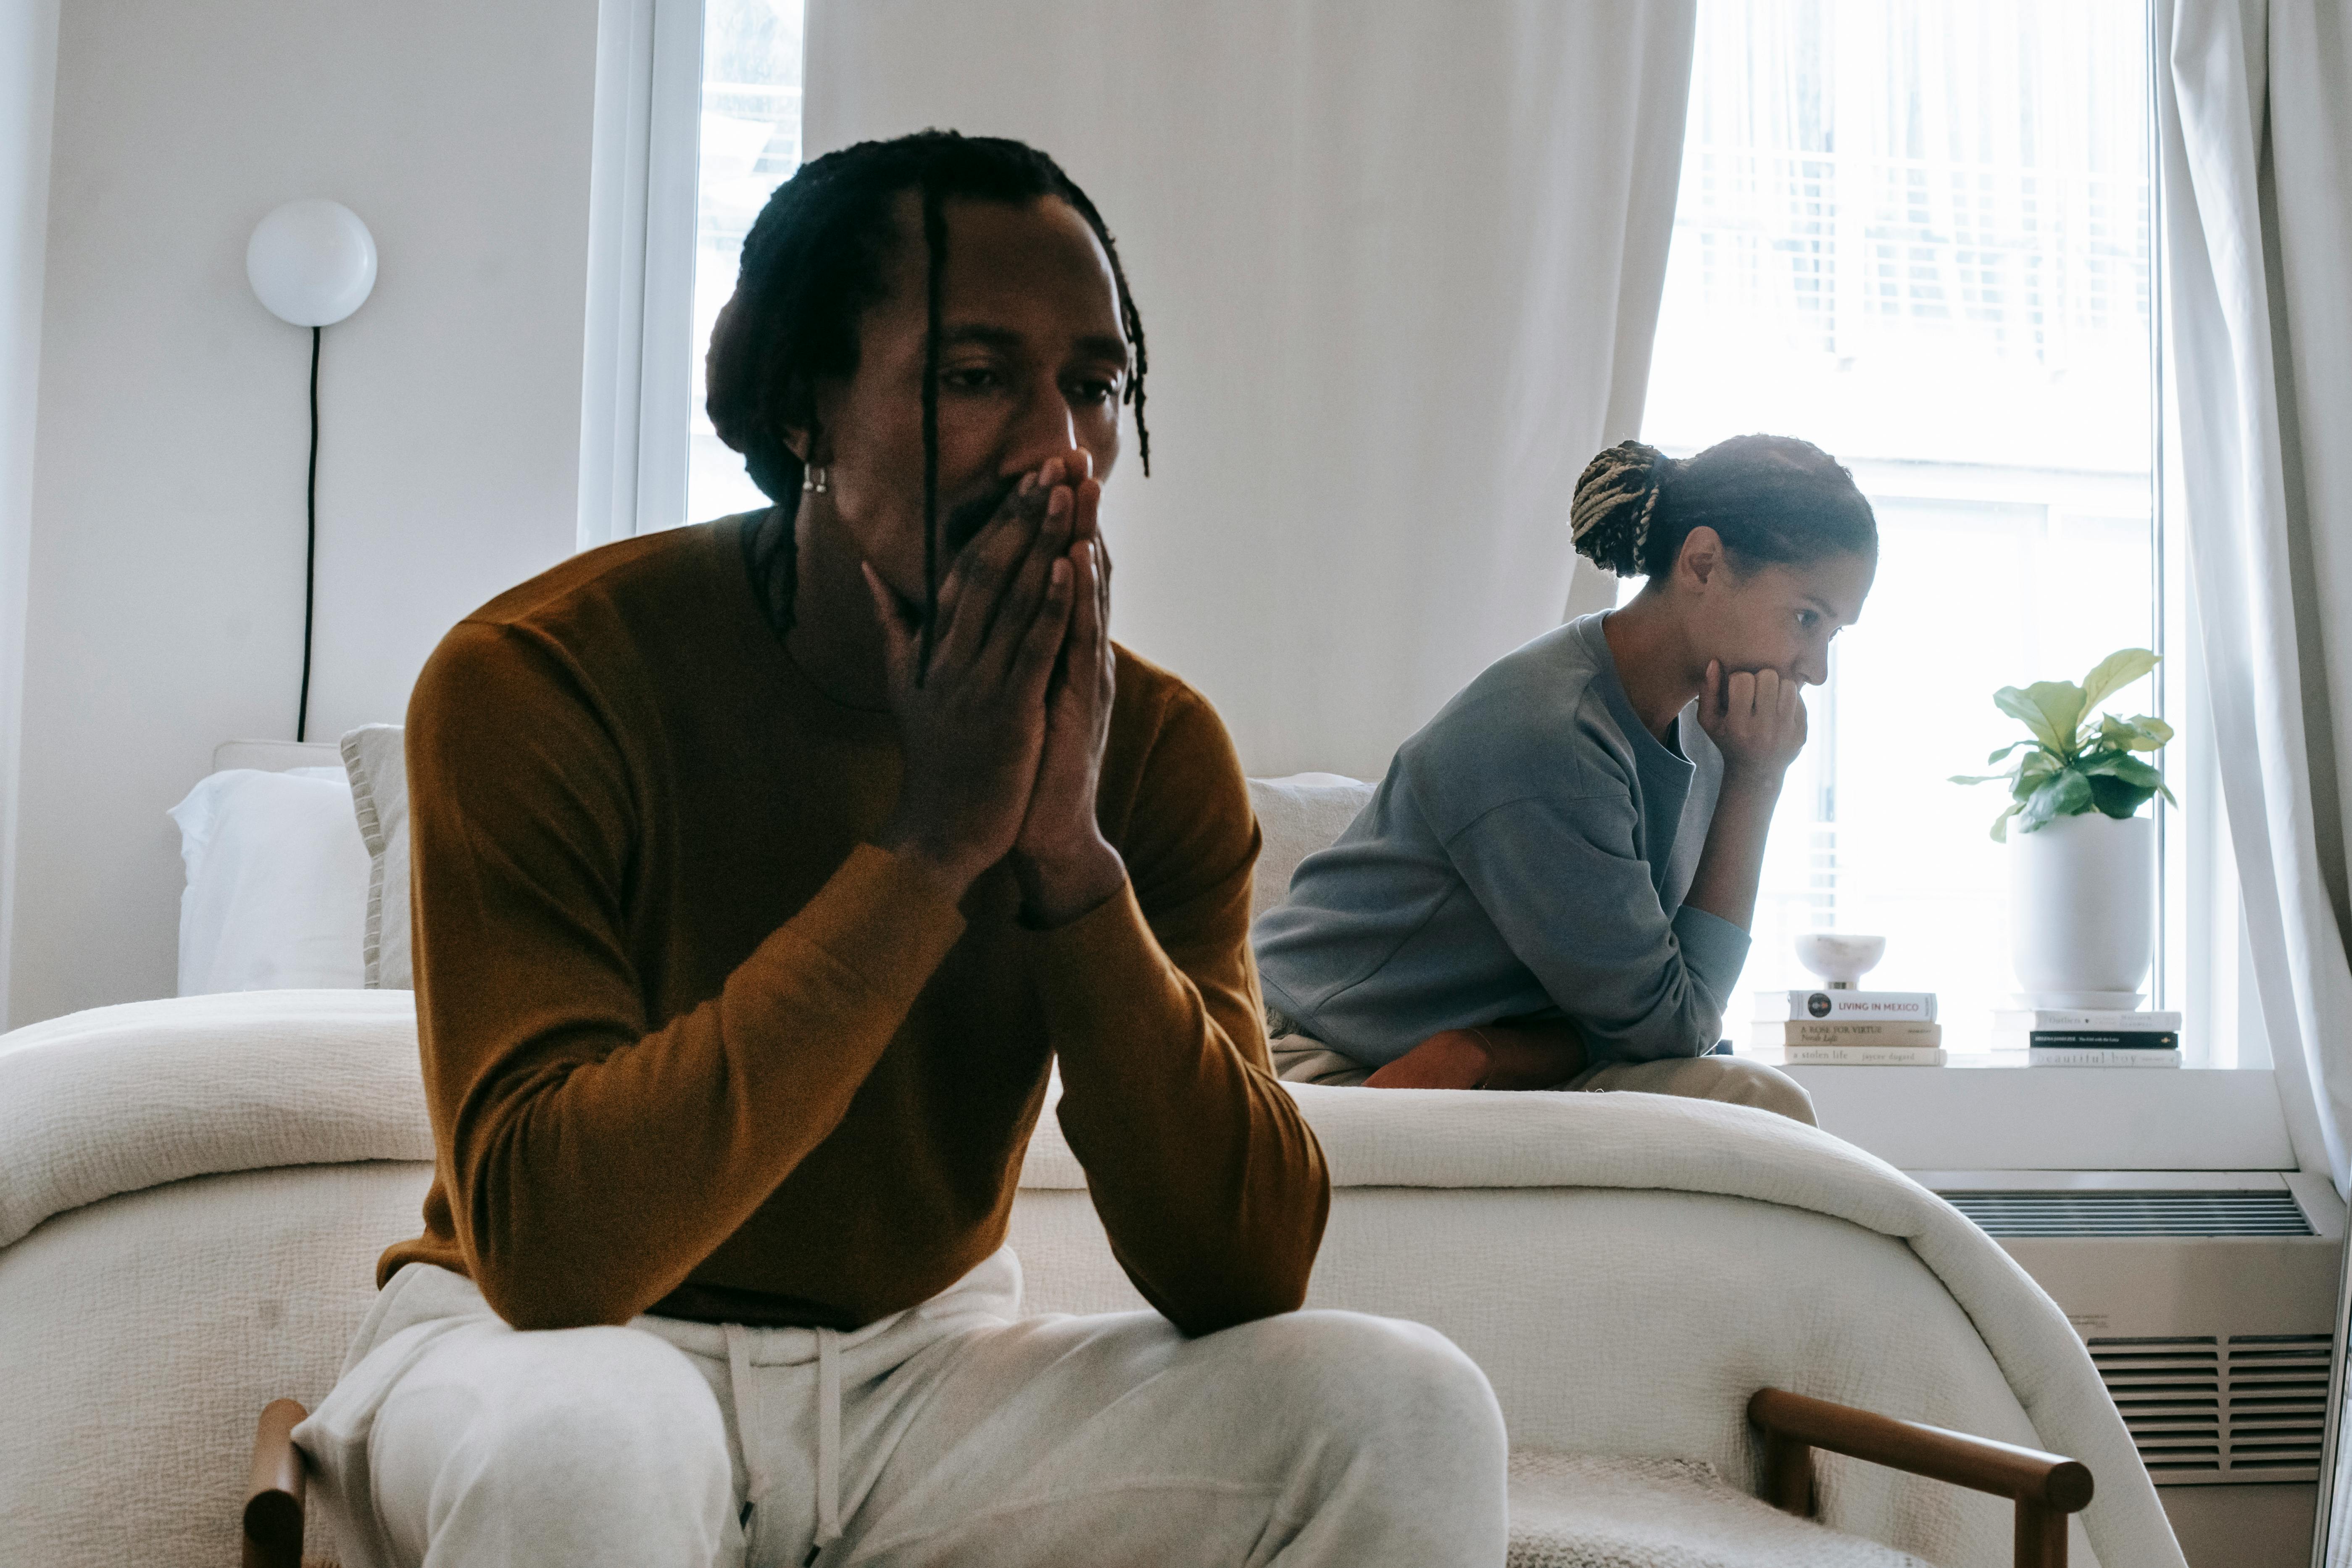 A distressed couple sitting on different ends in their bedroom | Source: Pexels